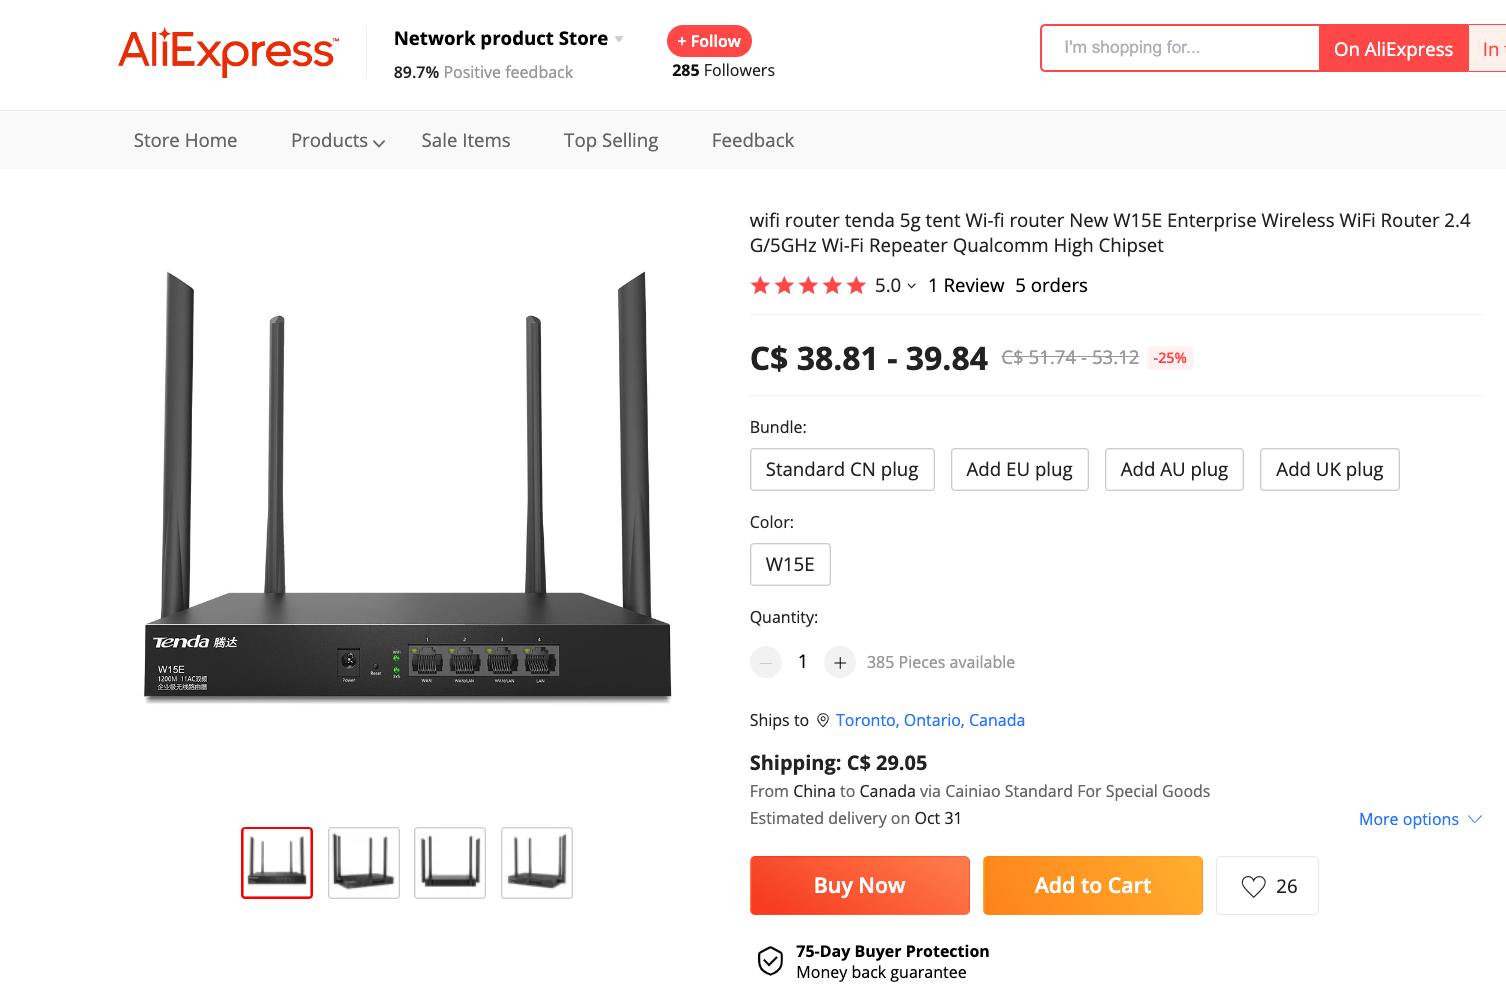 Unpatched Tenda WiFi router vulnerabilities leave home networks